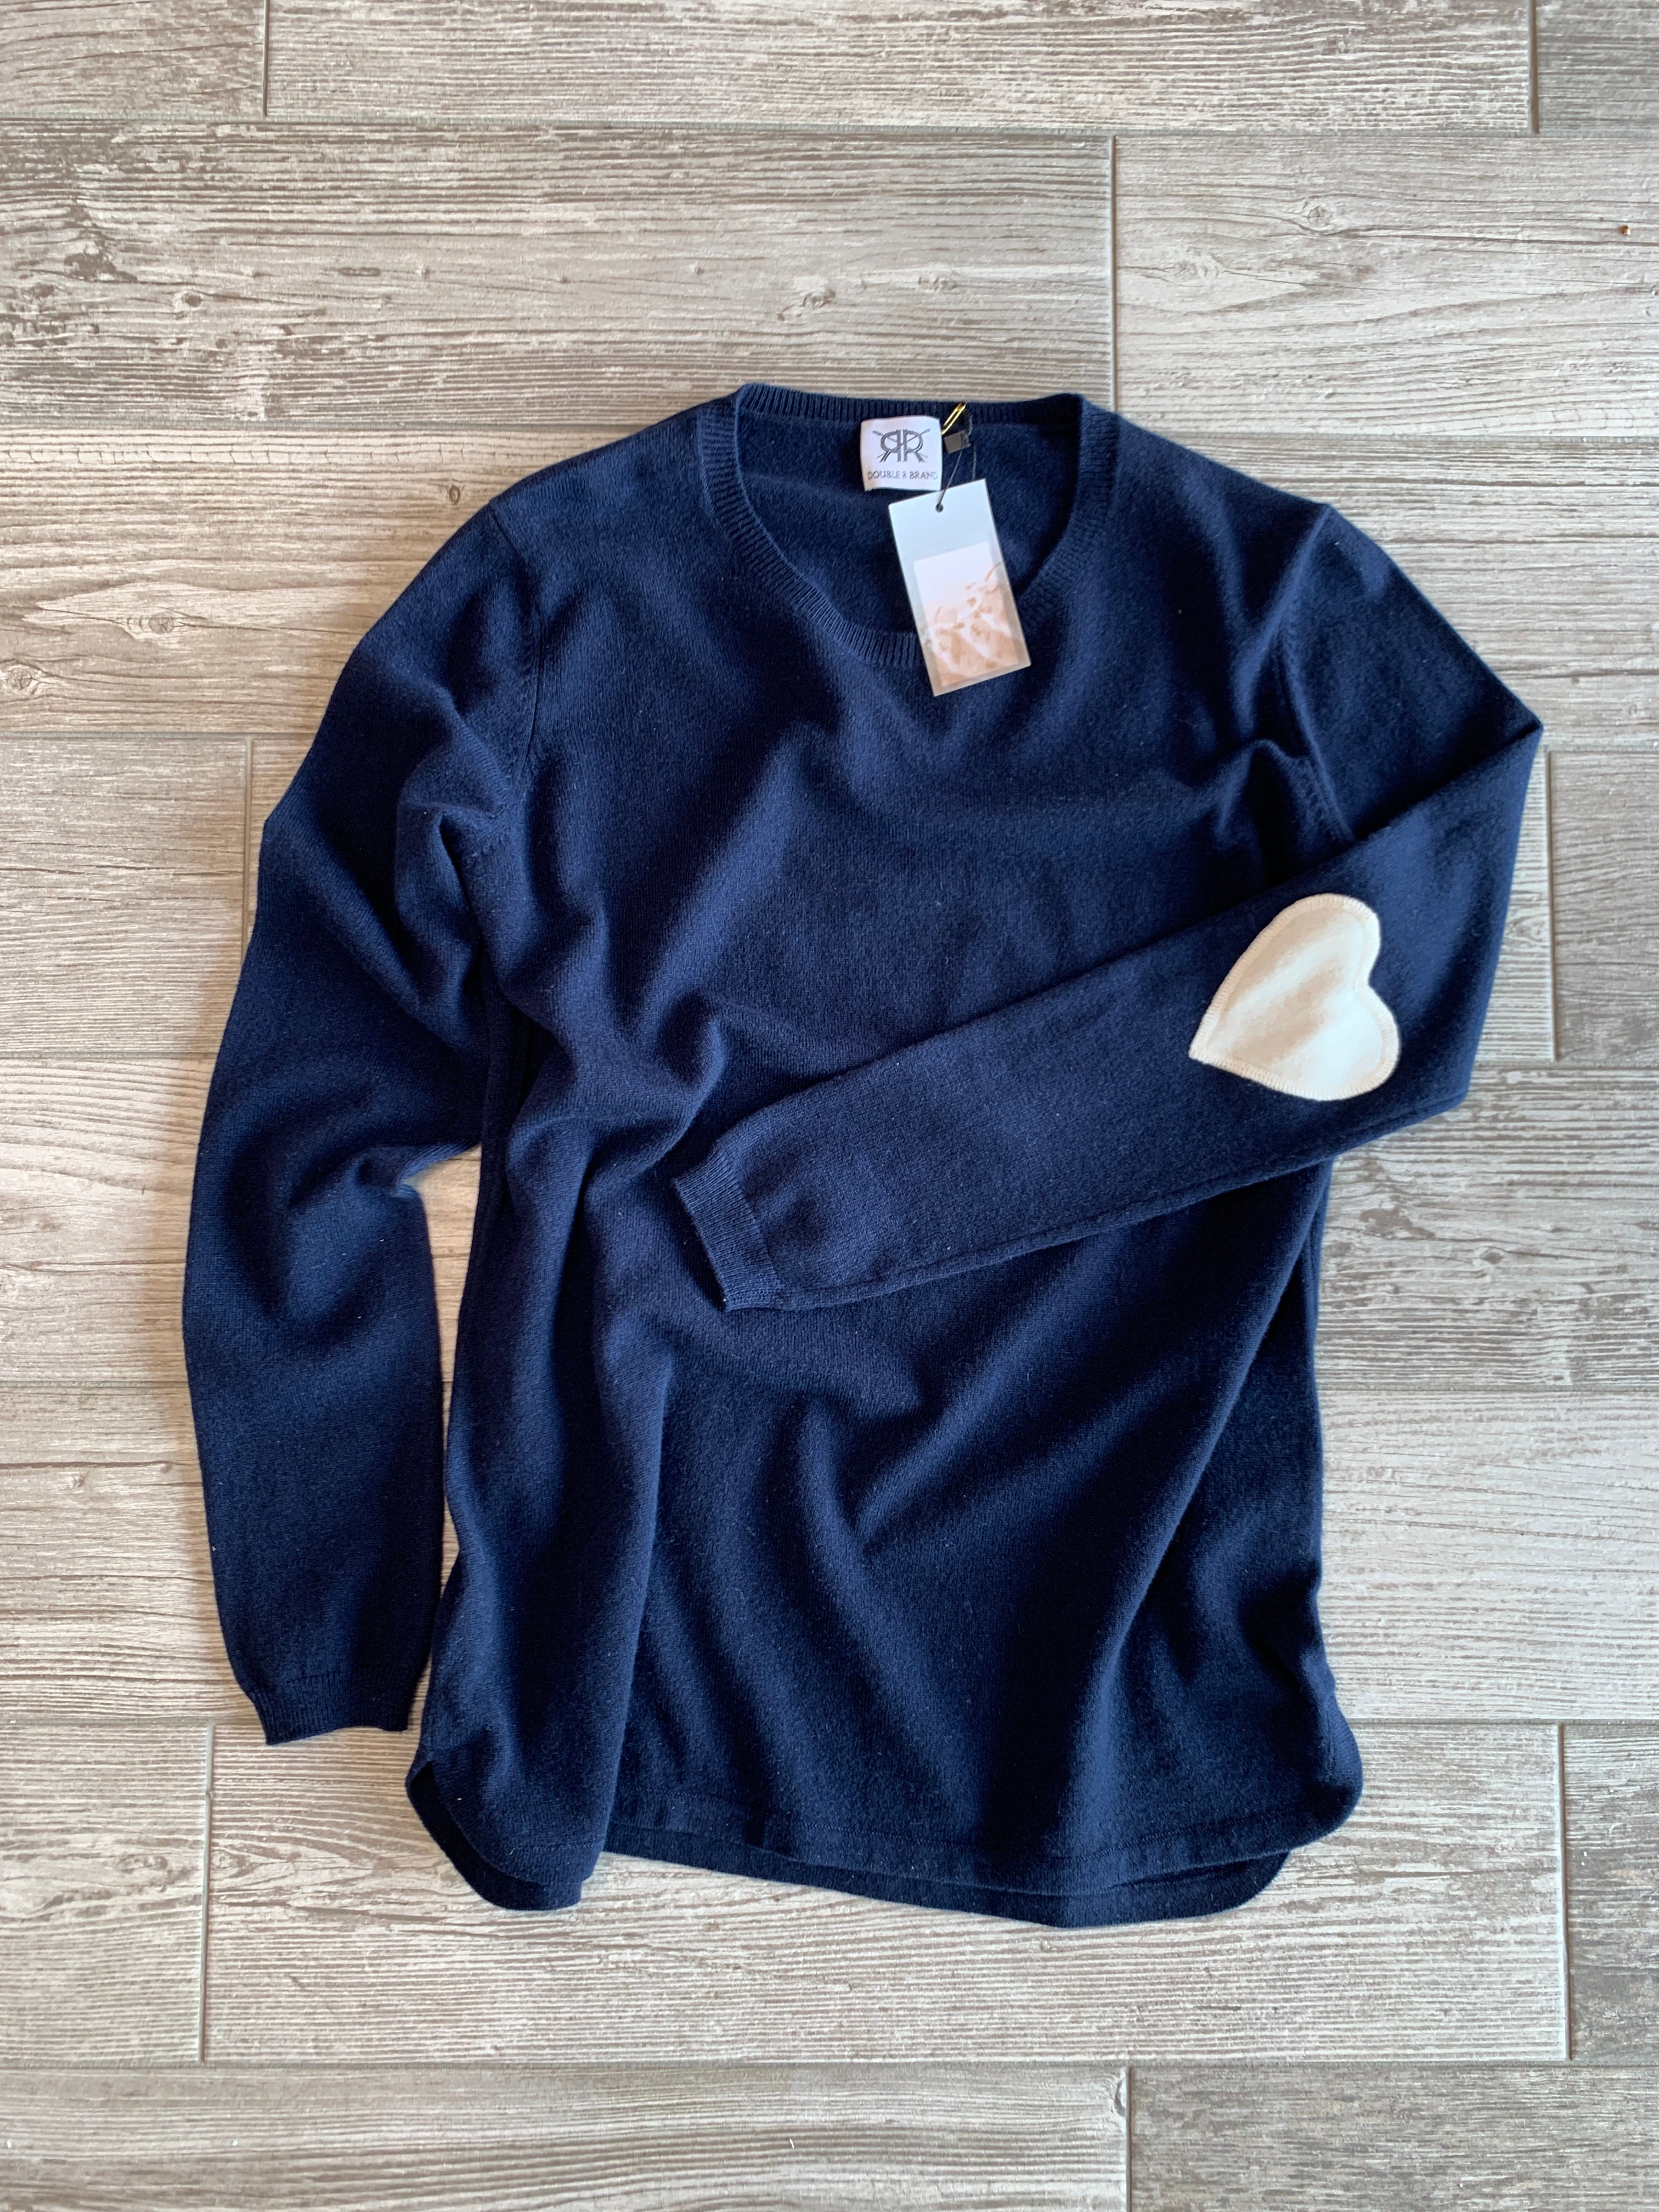 Scoop Hem Cashmere Sweater with Heart Elbow Patches - Navy/Ivory